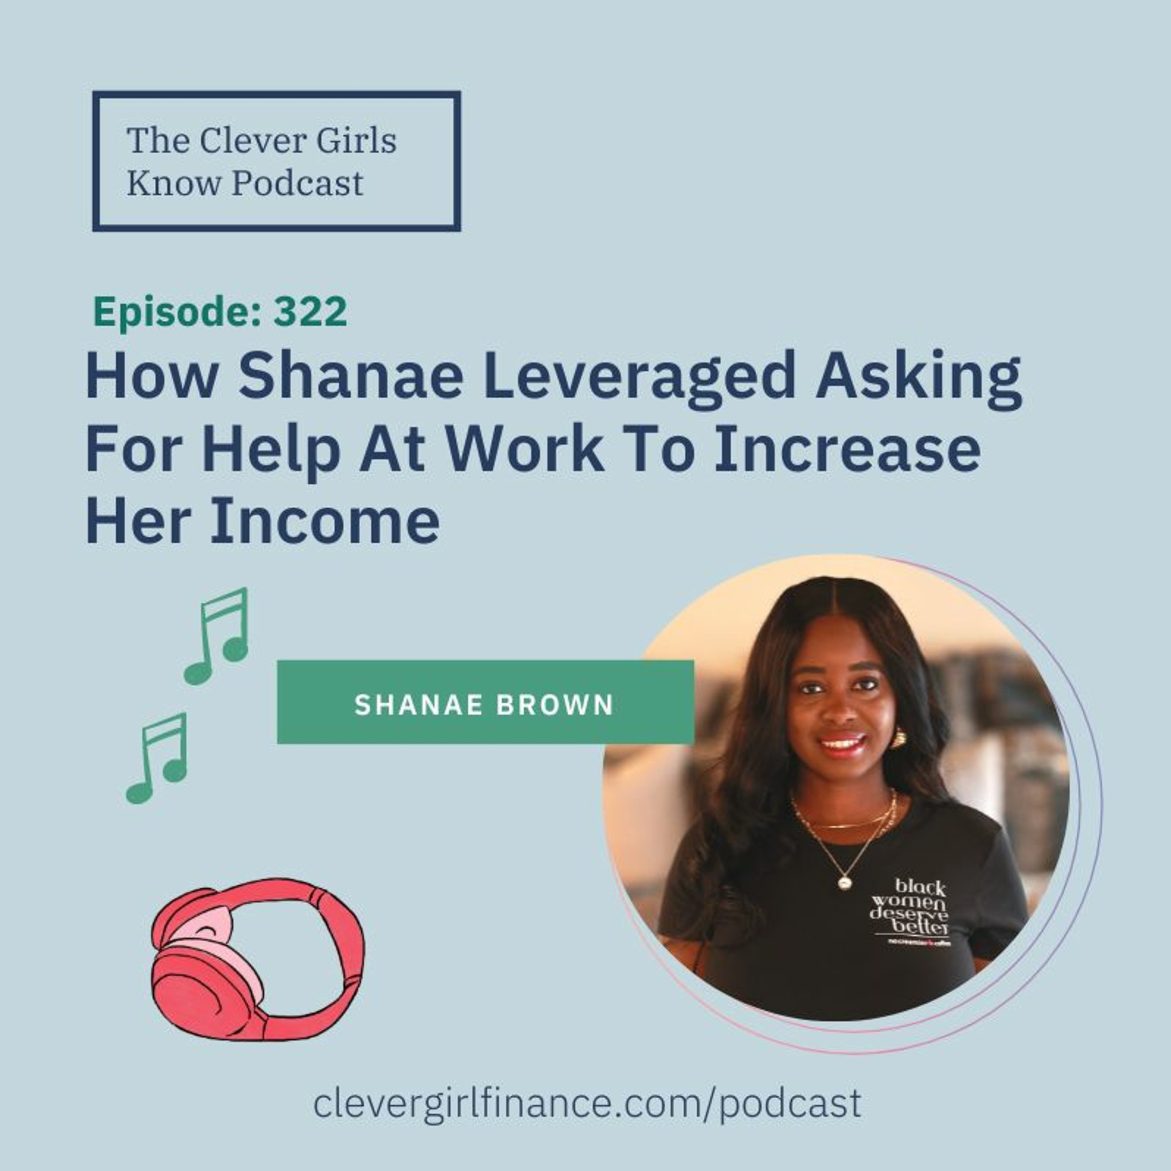 Black Podcasting - 322: How Shanae Leveraged Asking For Help At Work To Increase Her Income!